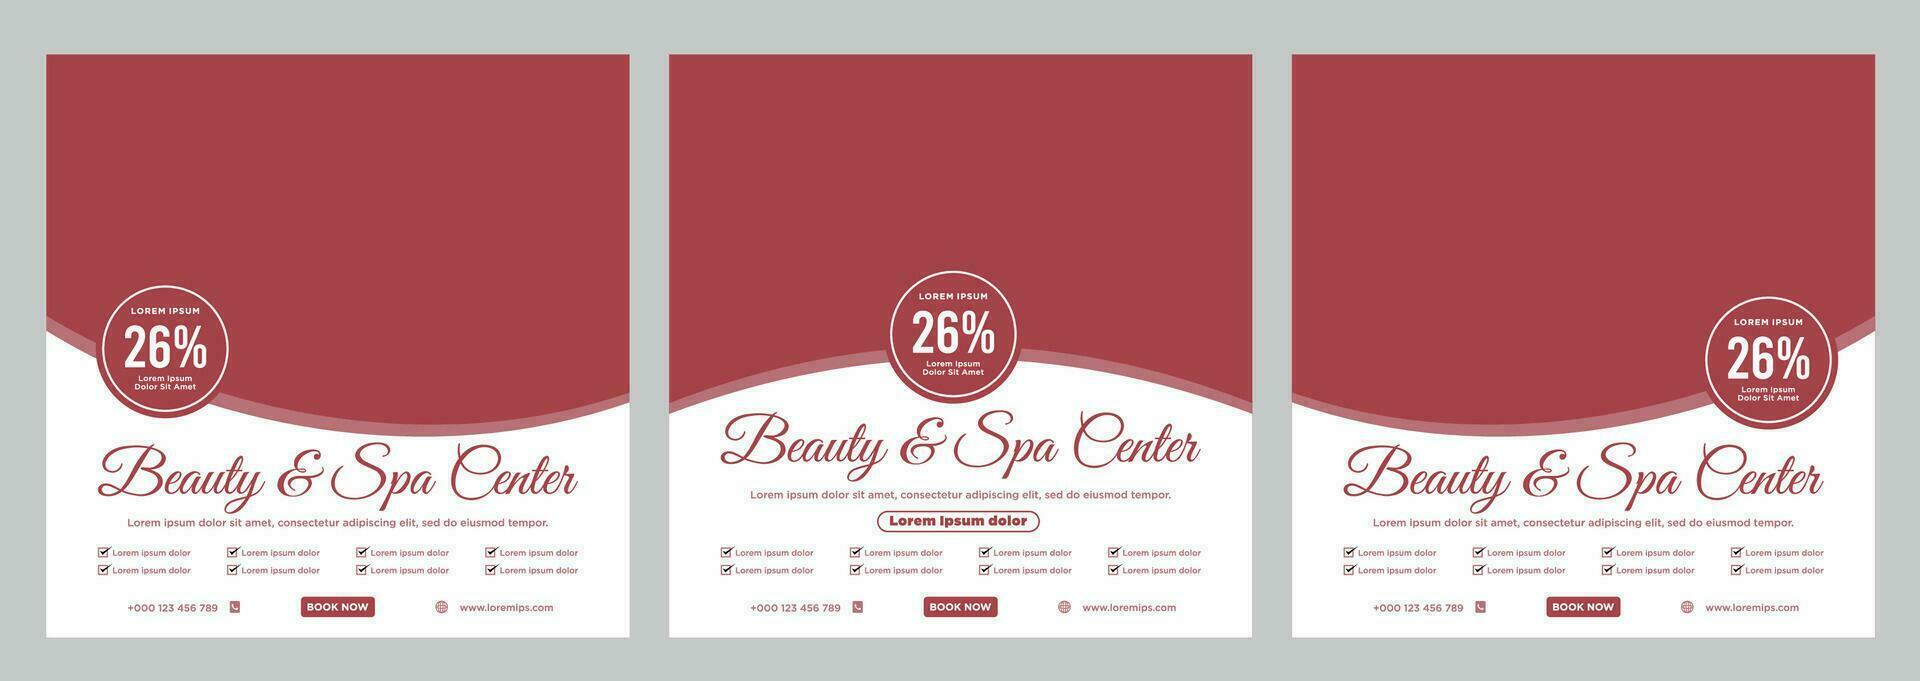 Beauty and spa banner or social media template vector